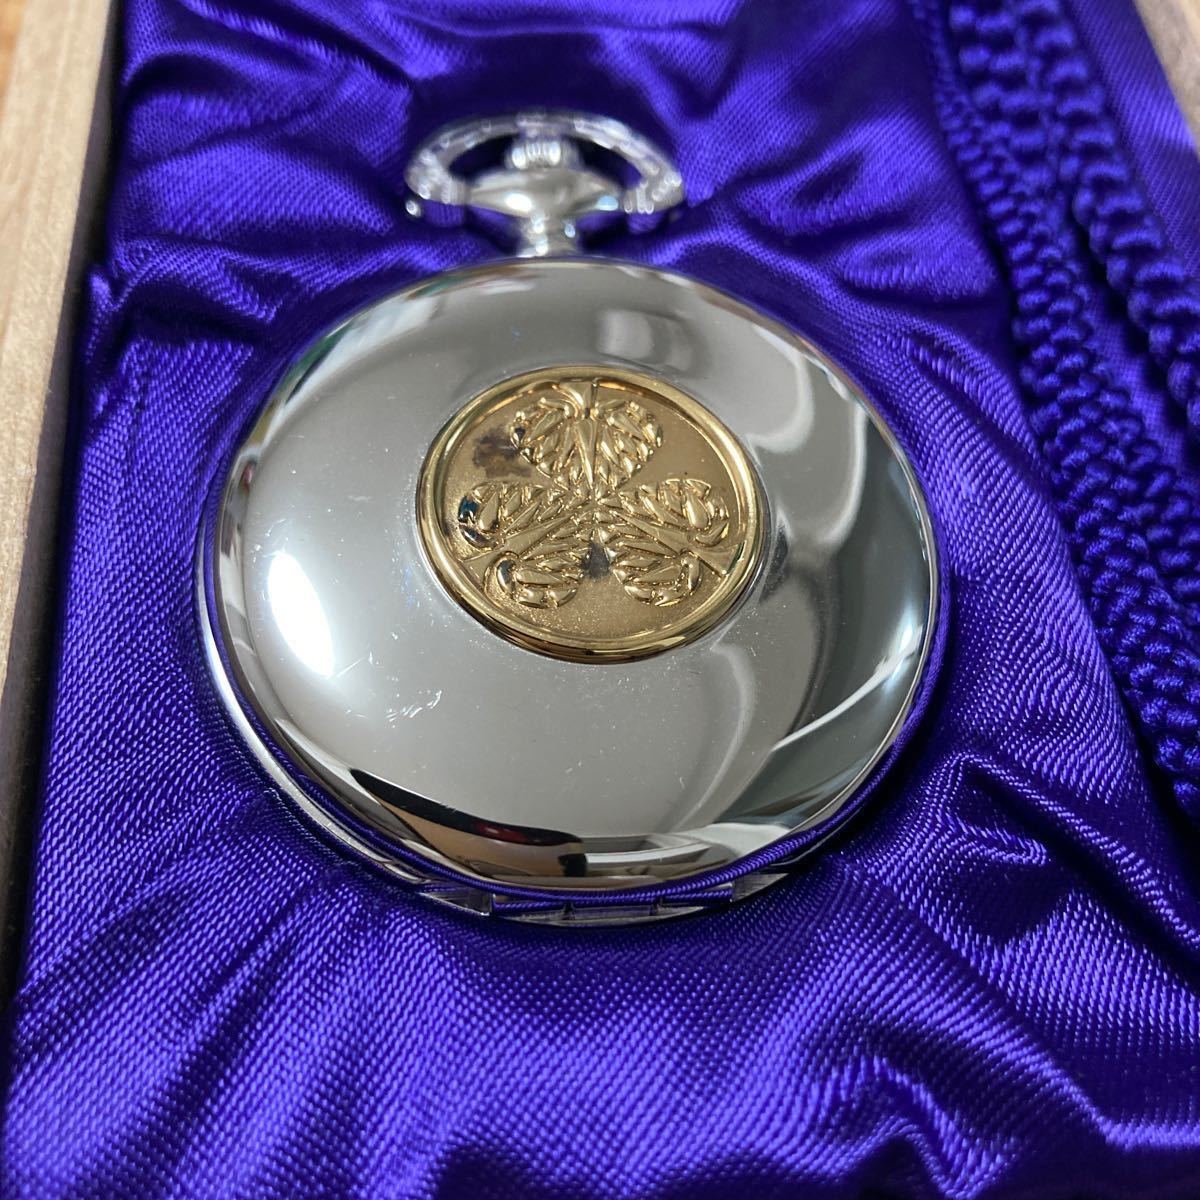  rare limited goods silver made pocket watch Edo . prefecture four 100 year memory Vintage virtue river light . virtue river ...SV925 silver 400th Anniversary of the EDO